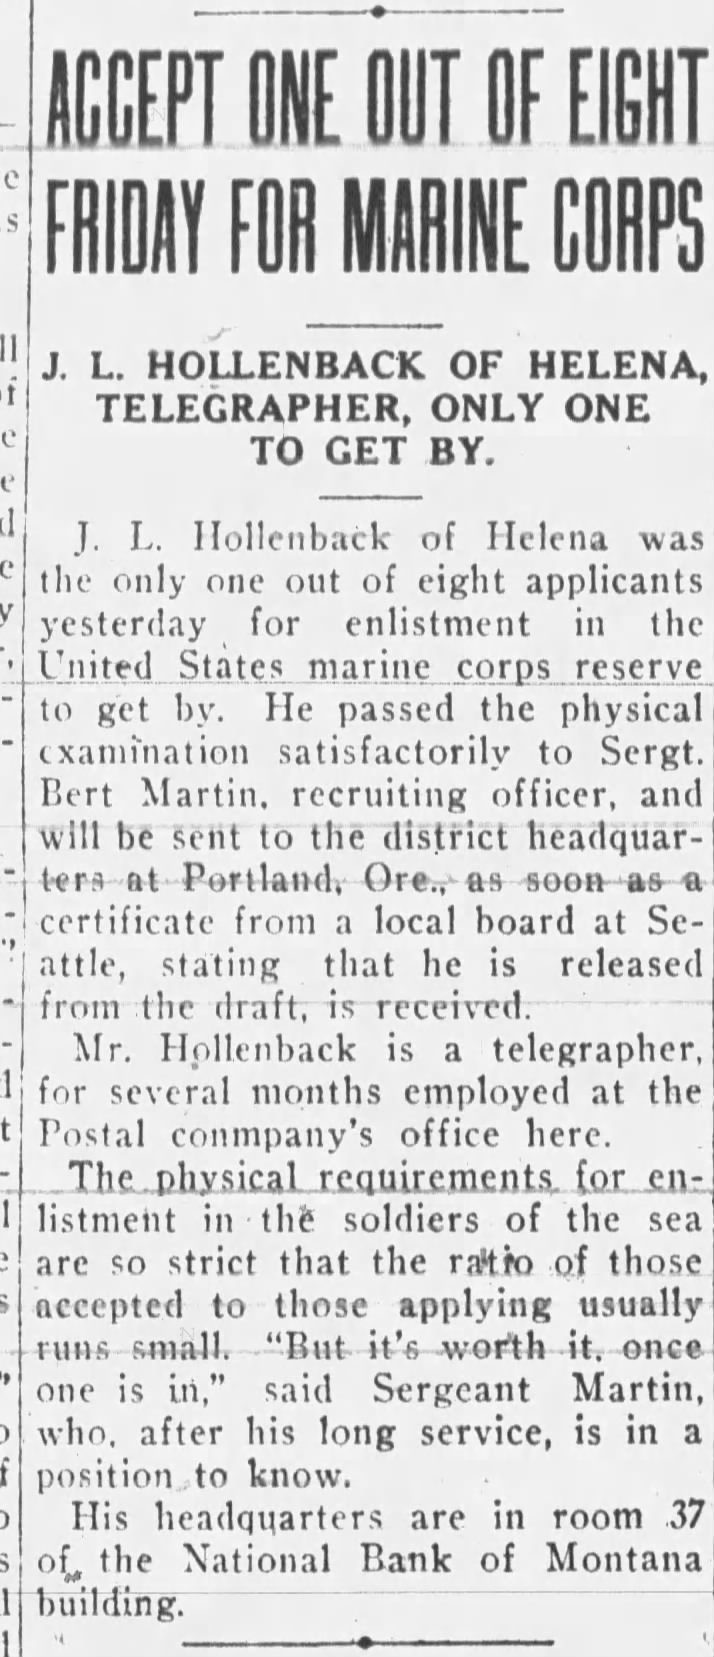 J.L. Hollenback, telegrapher, accepted into Marines